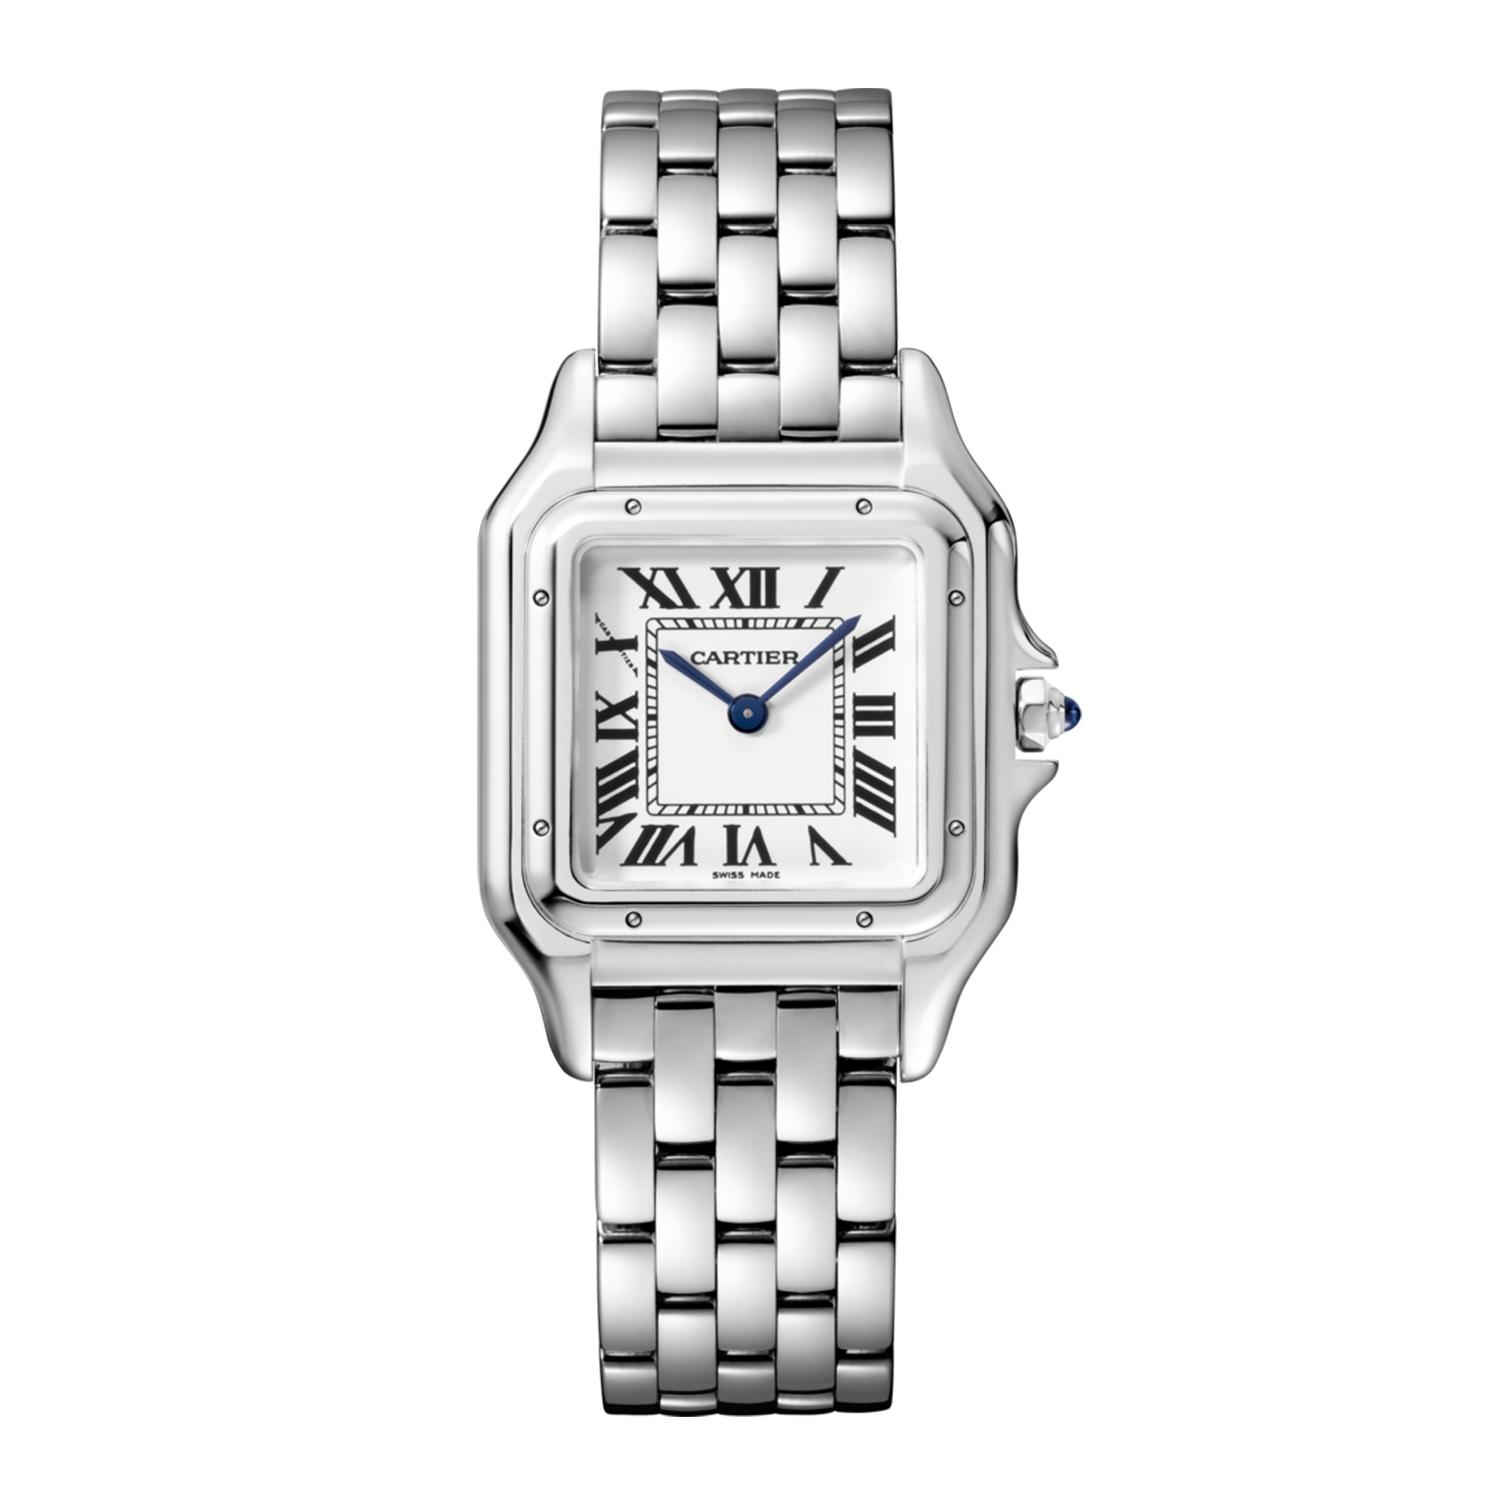 Panthere De Cartier Watch with Stainless Steel Case 0